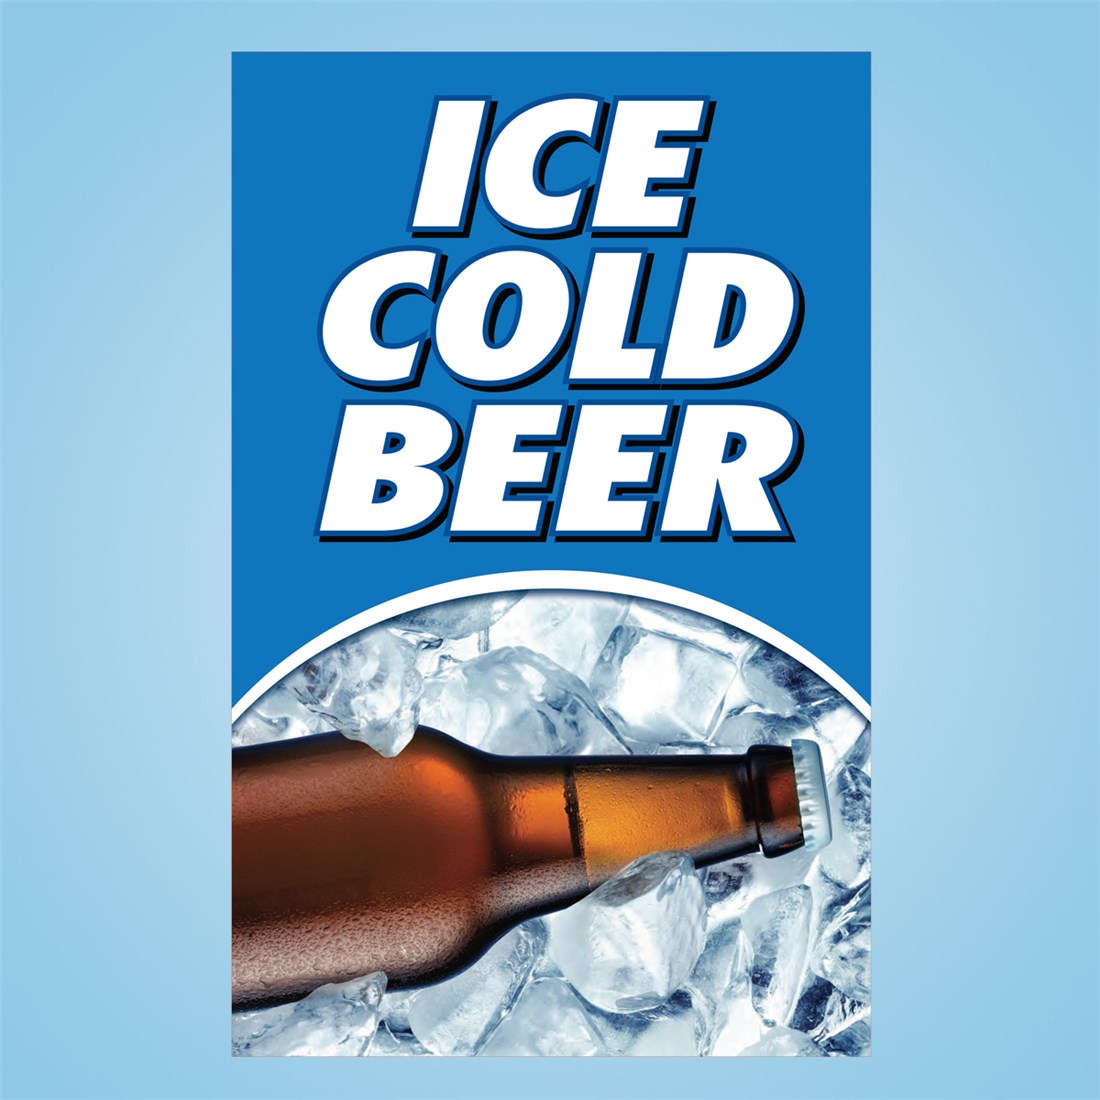 28 x 44 Message Insert - ICE COLD BEER